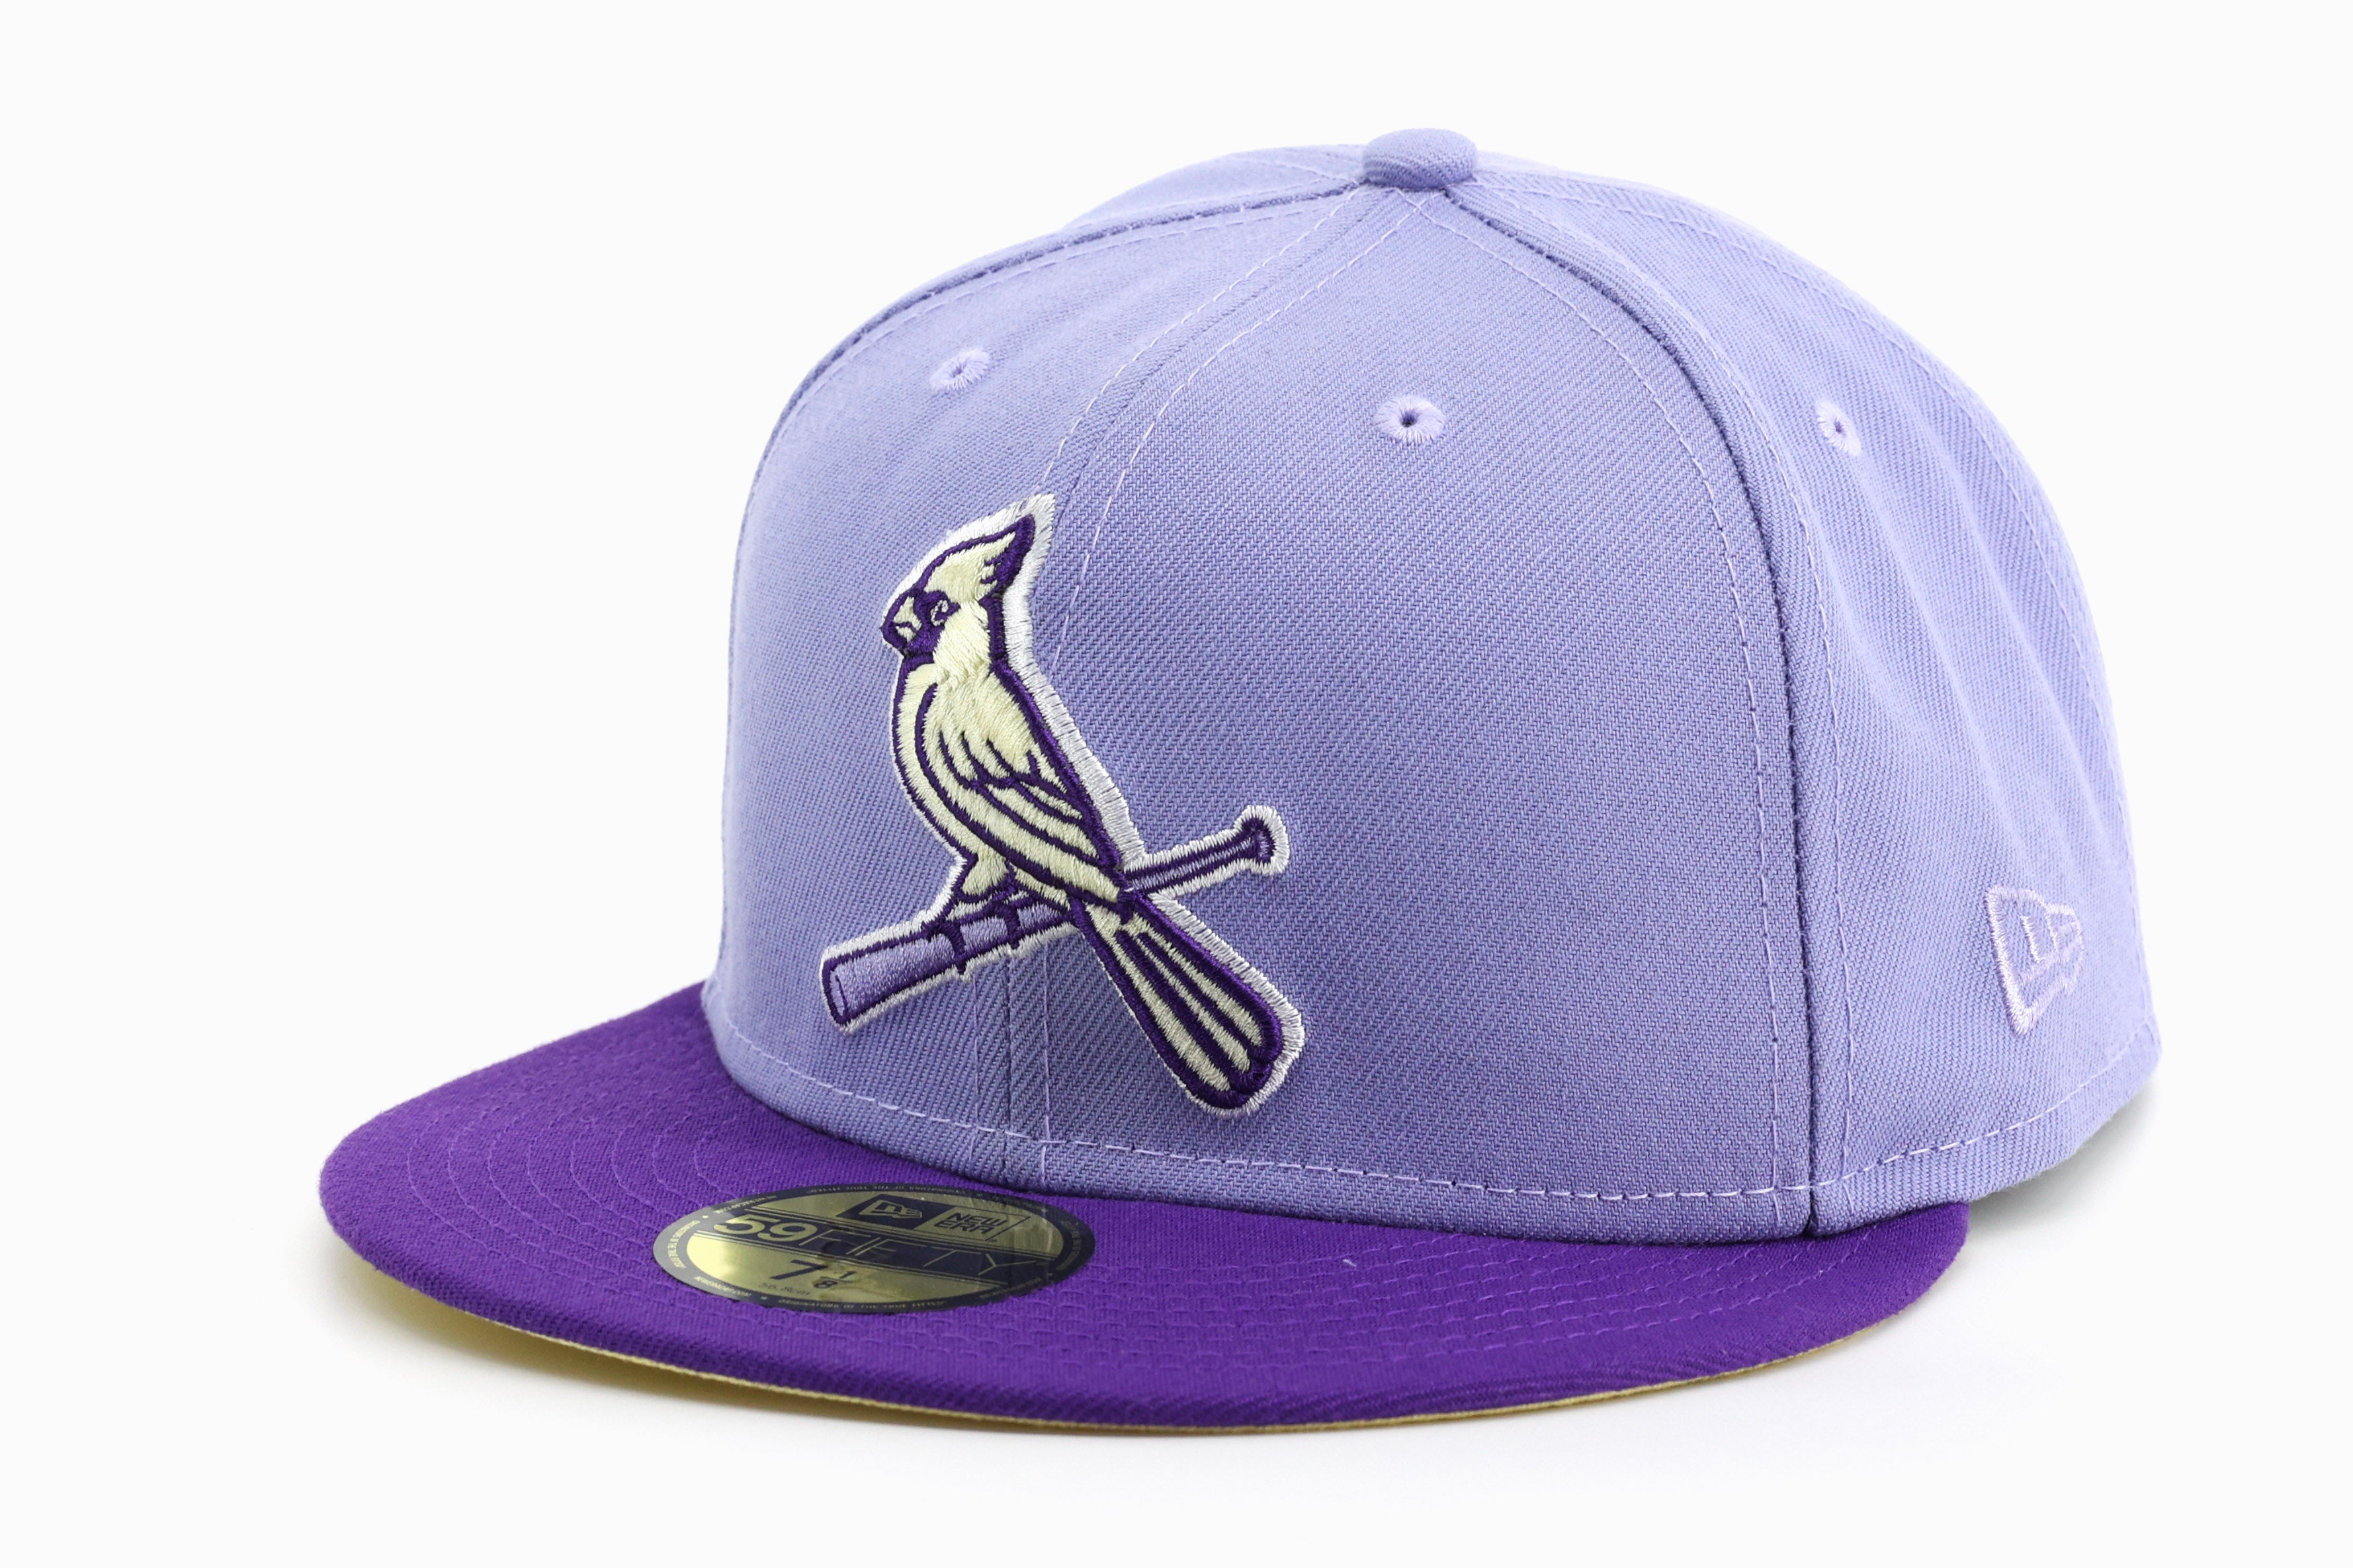 st louis cardinals hat fitted